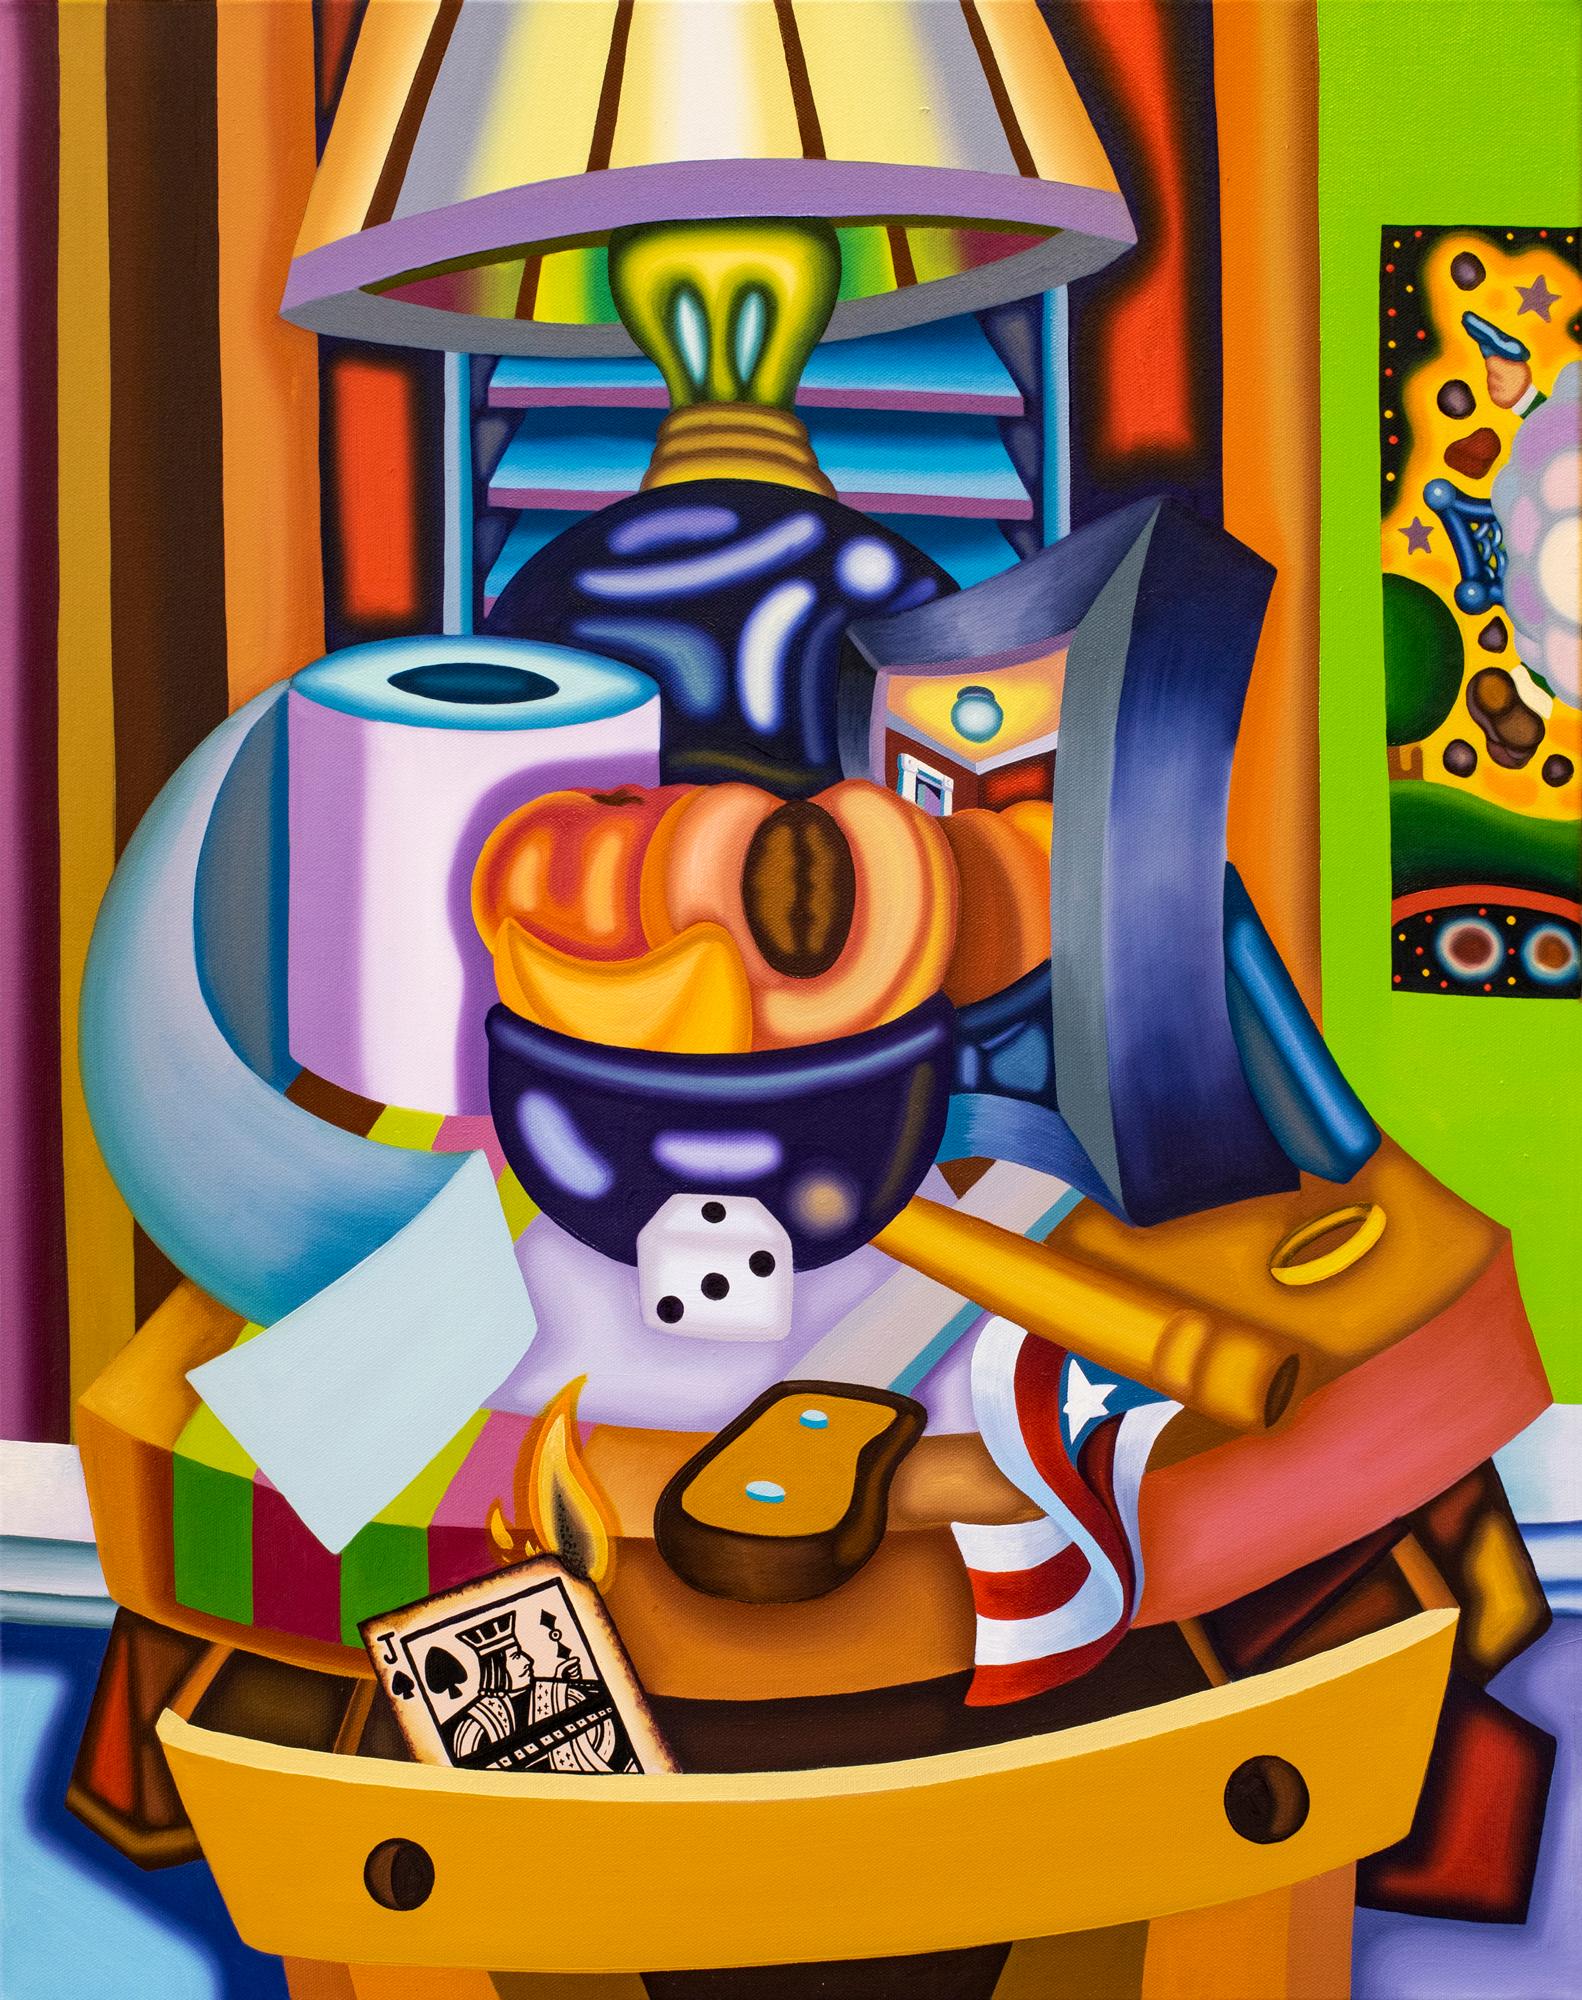 PEACHY KEEN FLAMING JACK STILL LIFE - Cubist, Bright & Bold Surreal Night Stand 